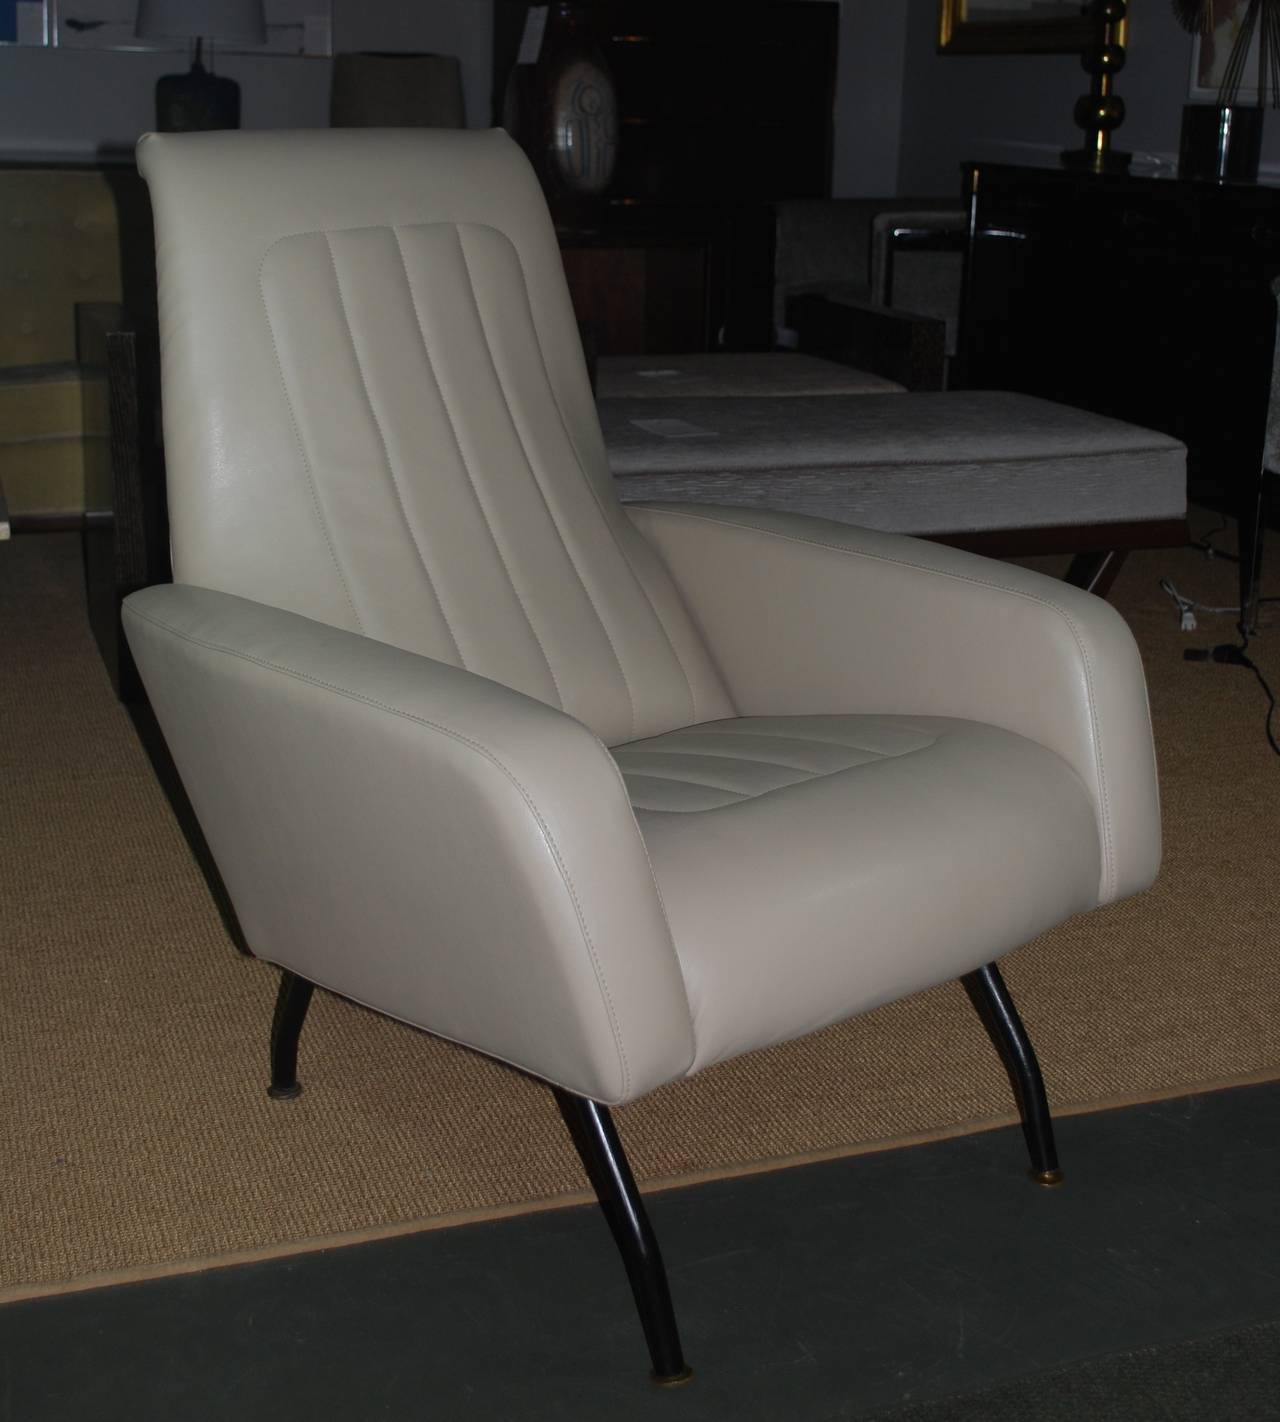 Mid-Century Modern Italian chairs with metal legs. Graceful lines, newly upholstered in tan faux leather.

Please check with me to make sure item is available to view in the gallery.